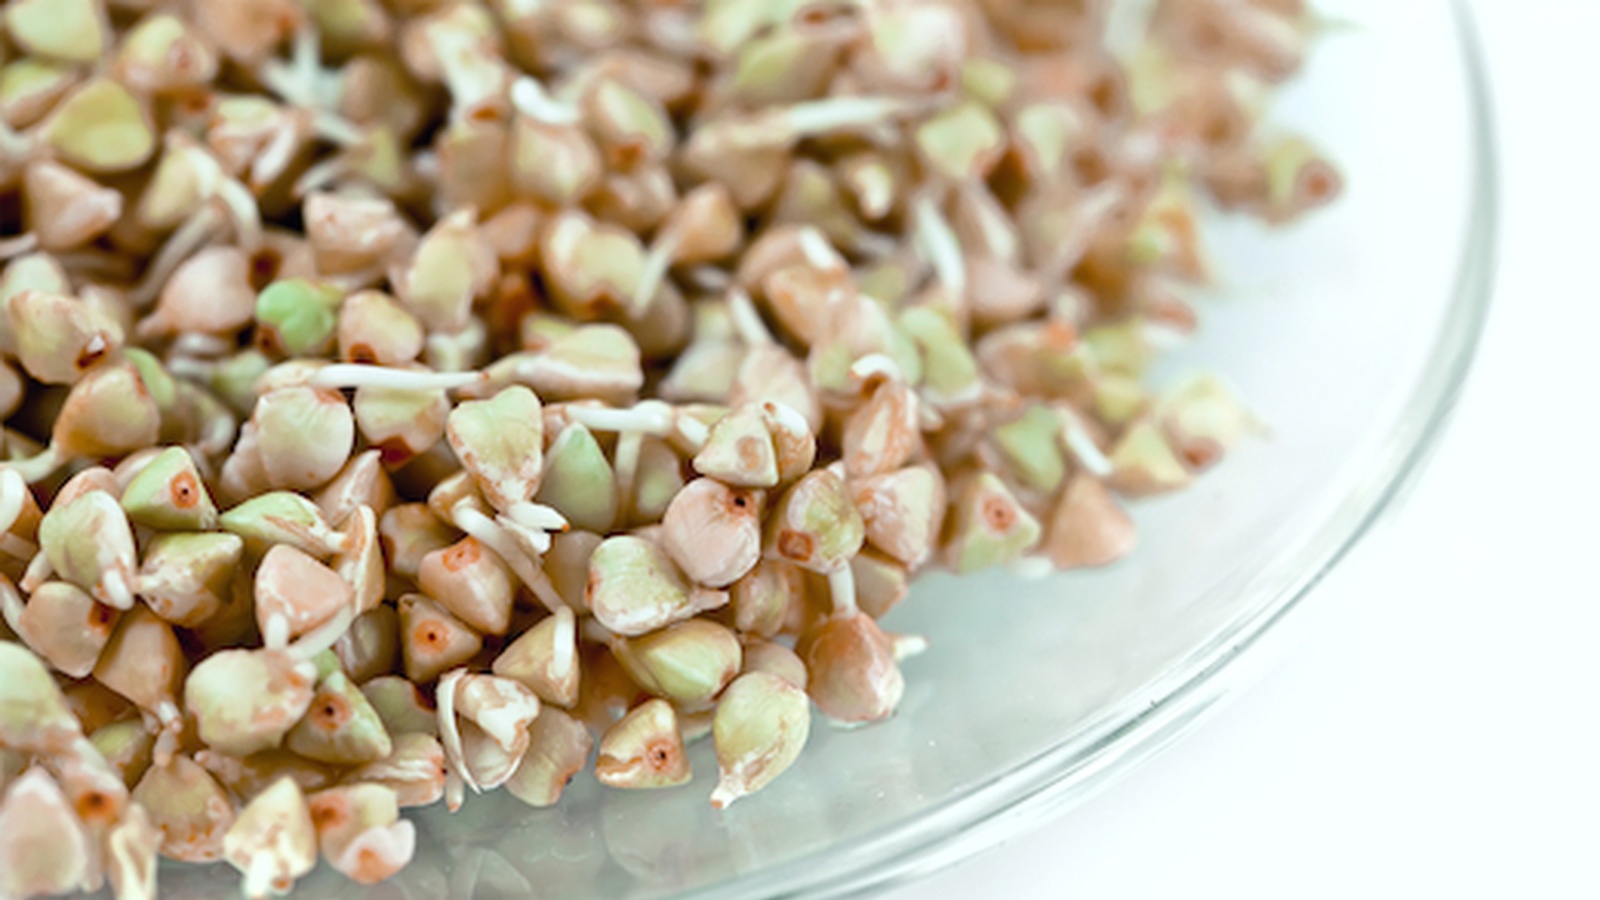 Buckwheat Sprouts - Nutritional Facts & Recipe